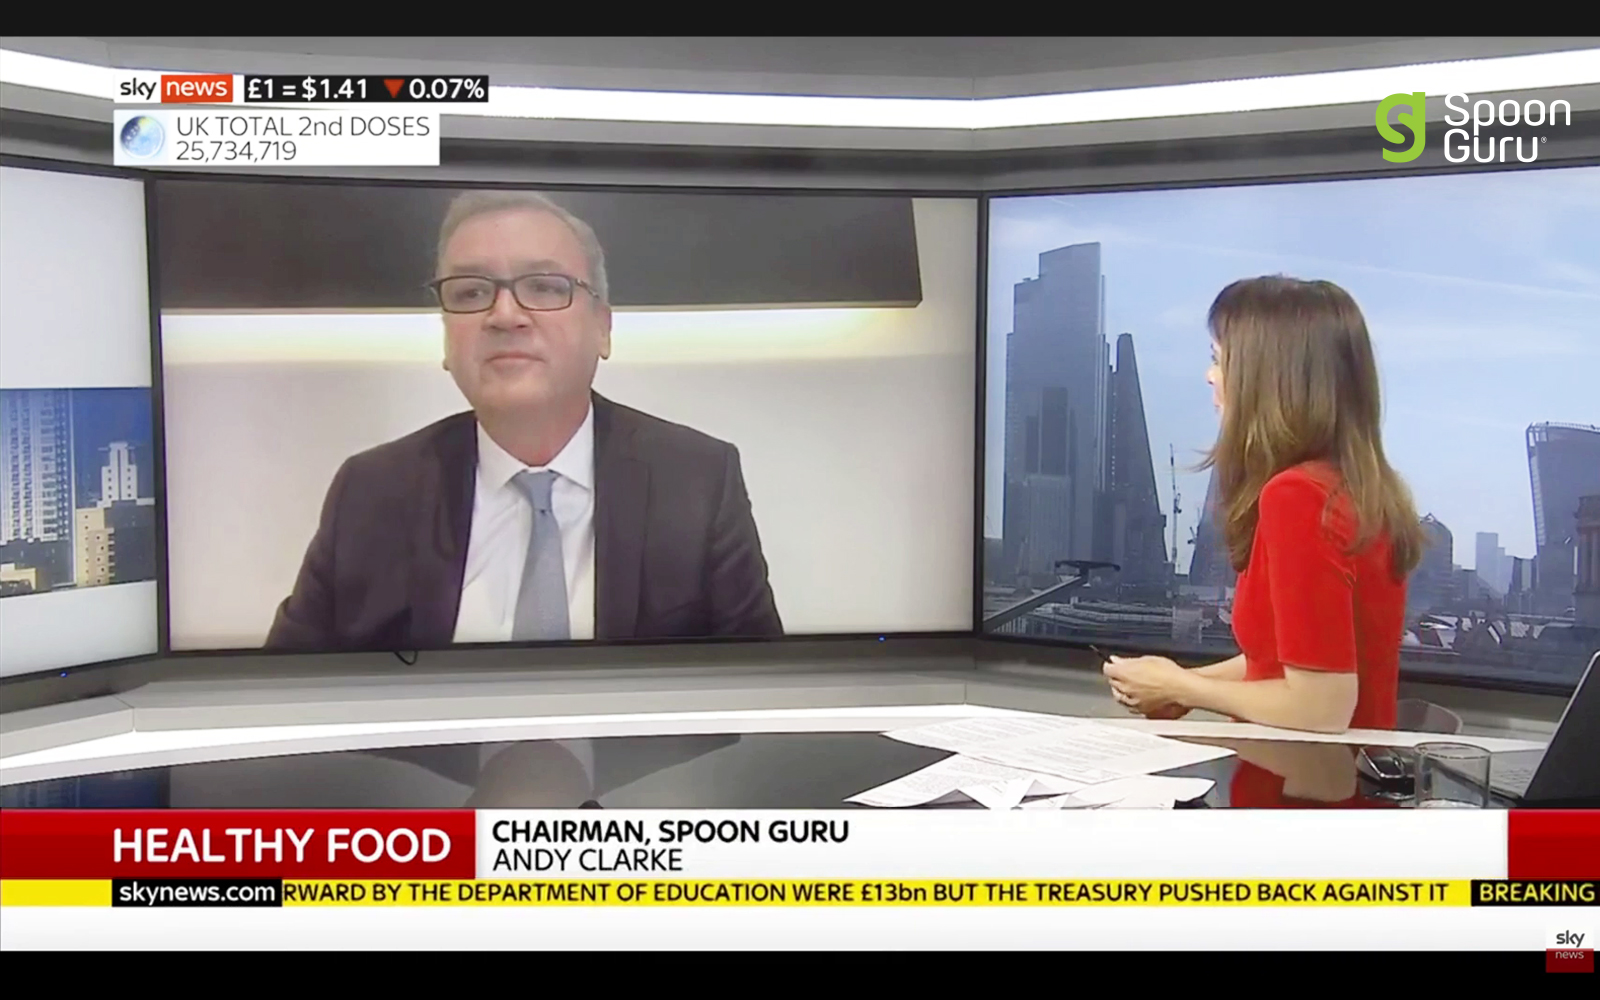 Are retailers doing enough to make our food healthier? Spoon Guru’s chairman, Andy Clarke, weighs in on Sky News